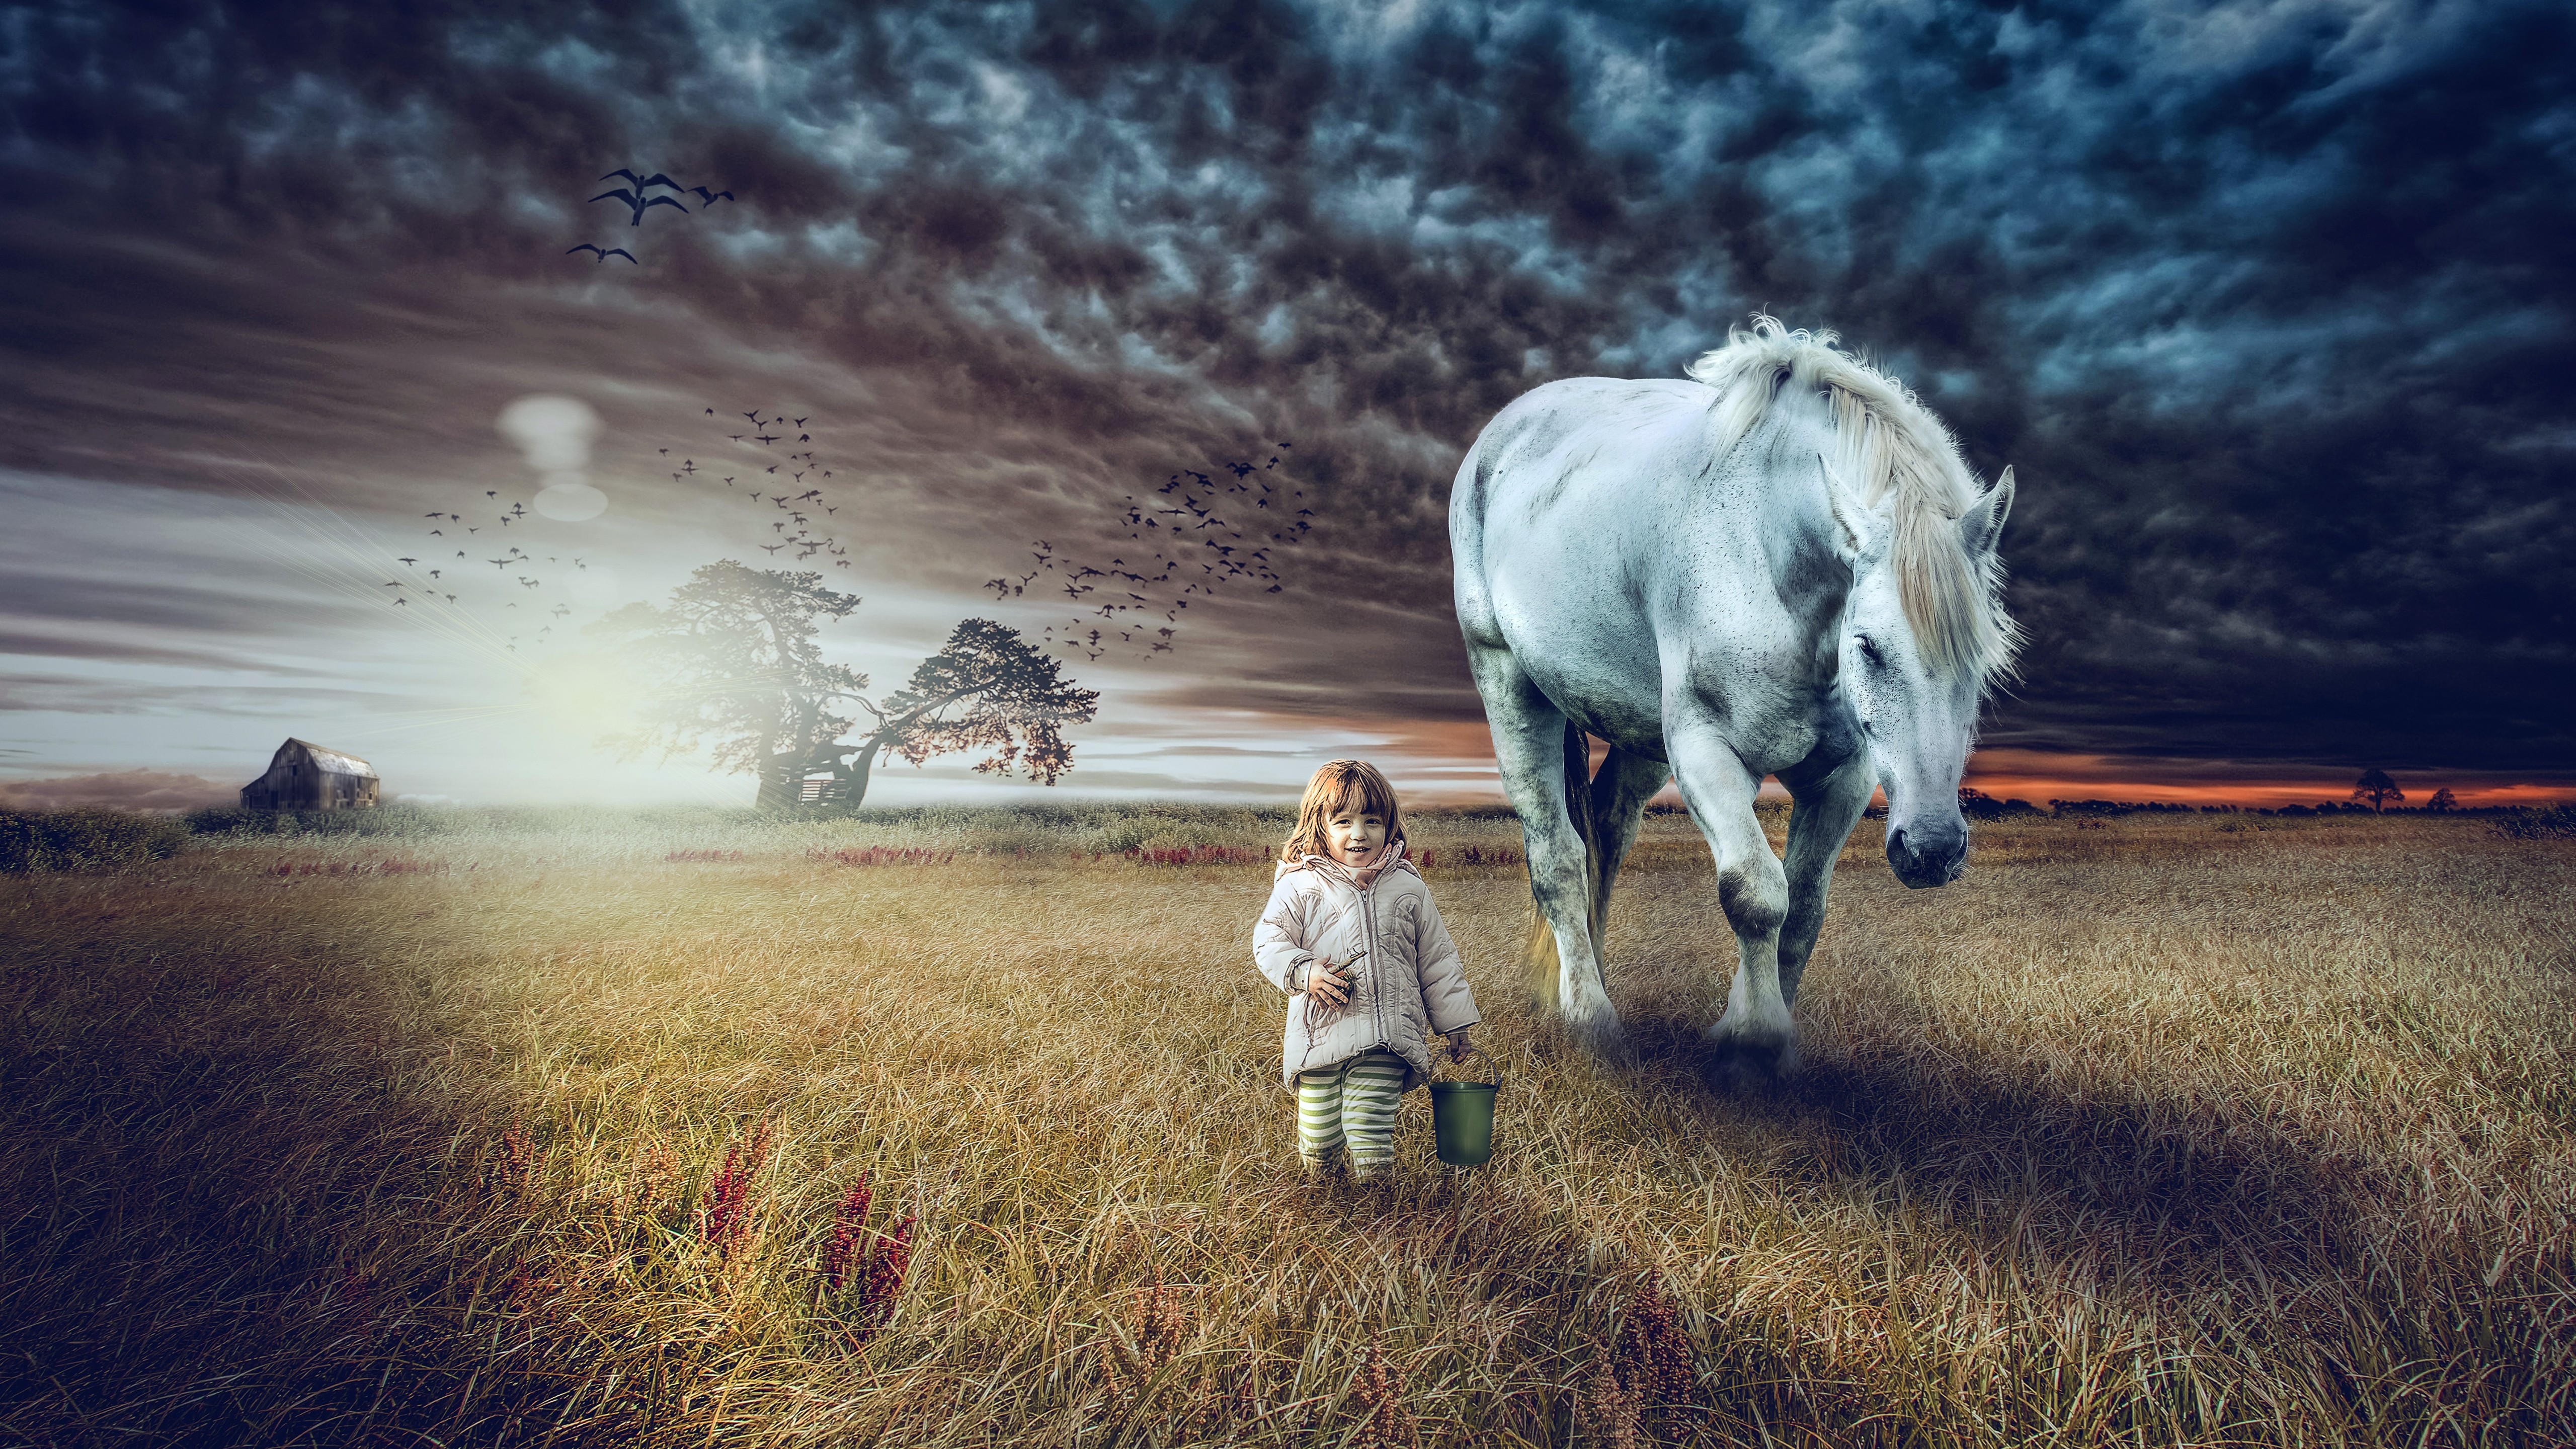 Cute Girl And Horse 5k - Cute Girl With Horse - HD Wallpaper 